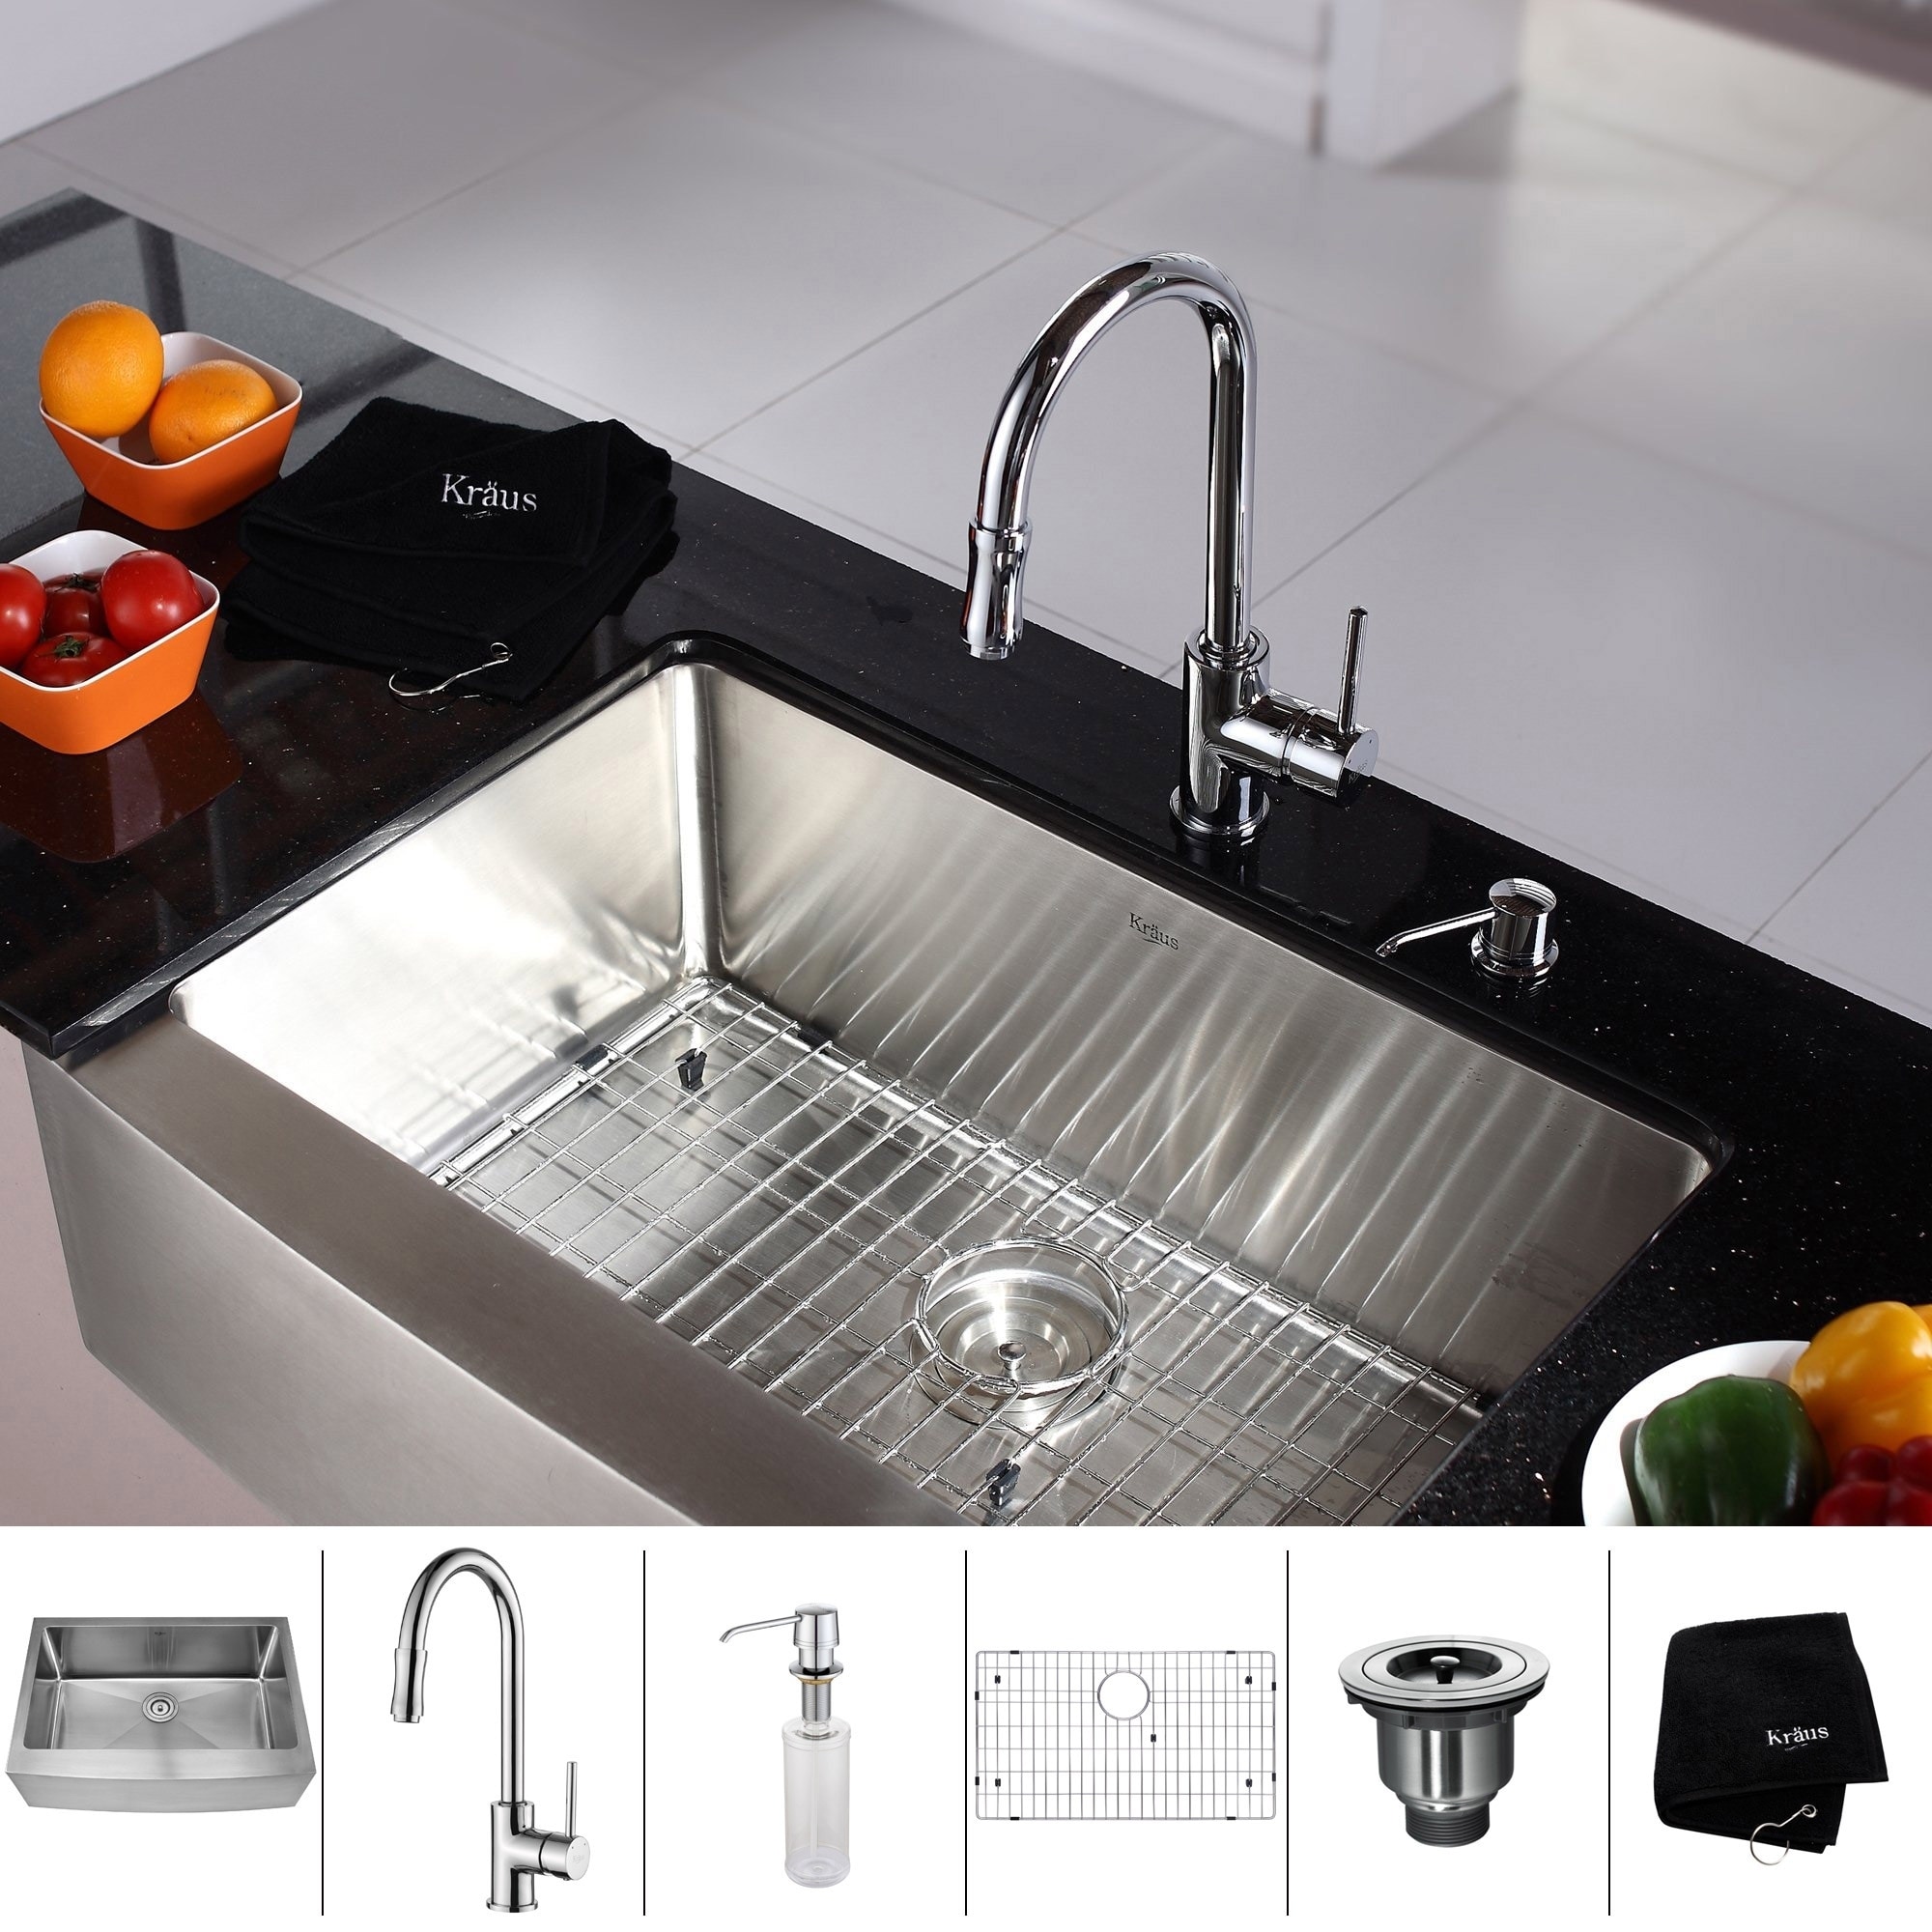 https://ak1.ostkcdn.com/images/products/4655374/KRAUS-36-Inch-Farmhouse-Single-Bowl-Stainless-Steel-Kitchen-Sink-with-Pull-Down-Kitchen-Faucet-and-Soap-Dispenser-d80c837e-4e5e-4754-84e8-2d4cb5736e83.jpg